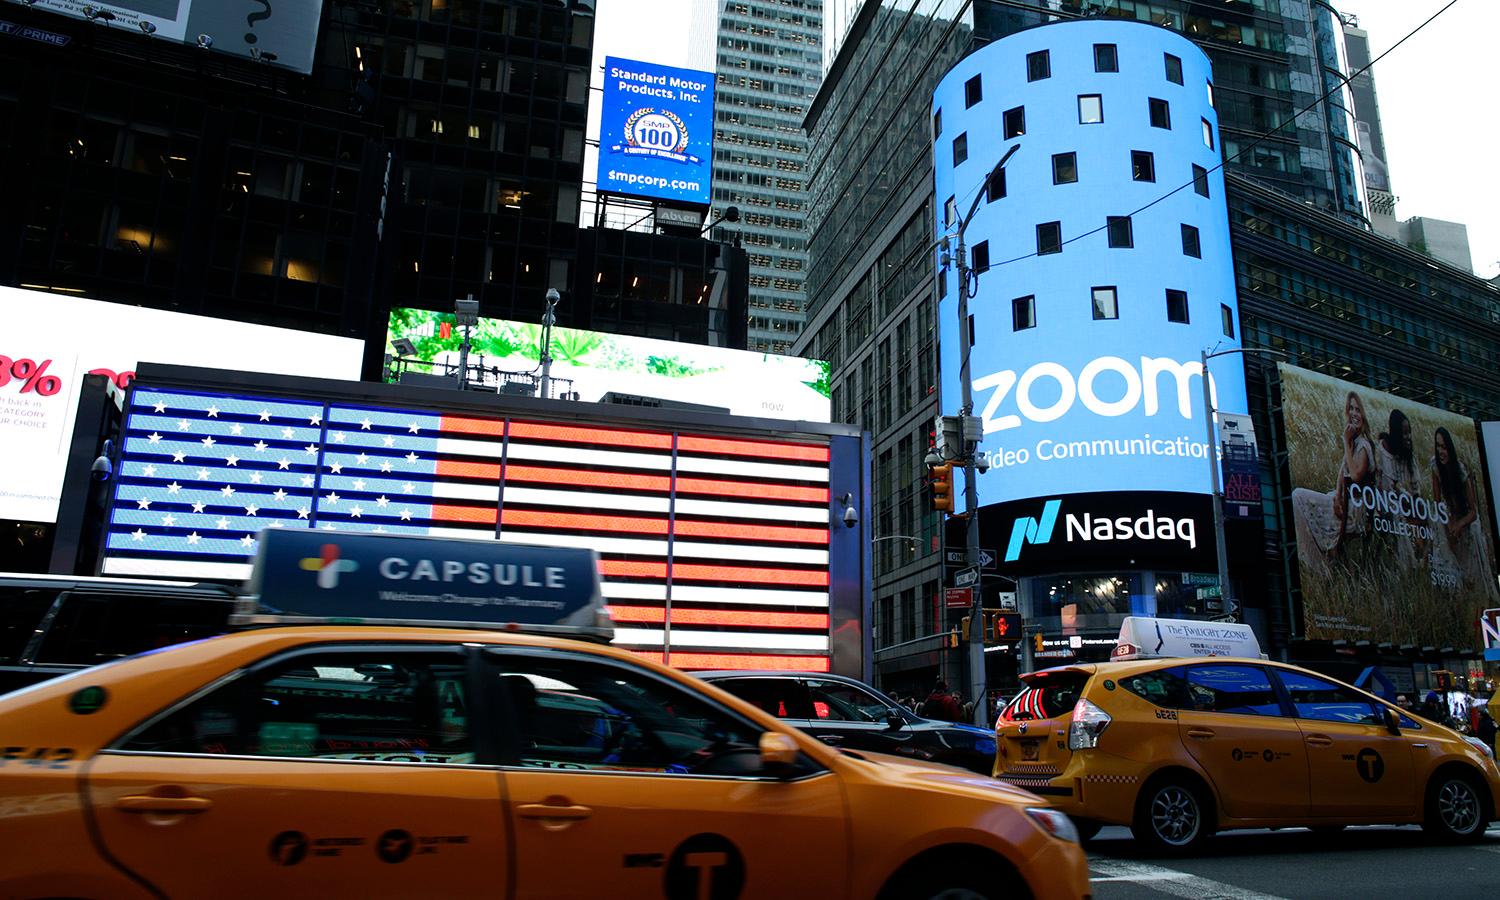 People pass by the Nasdaq building as the screen shows the logo of the video-conferencing software company Zoom on April 18, 2019, in New York City. (Photo by Kena Betancur/Getty Images)